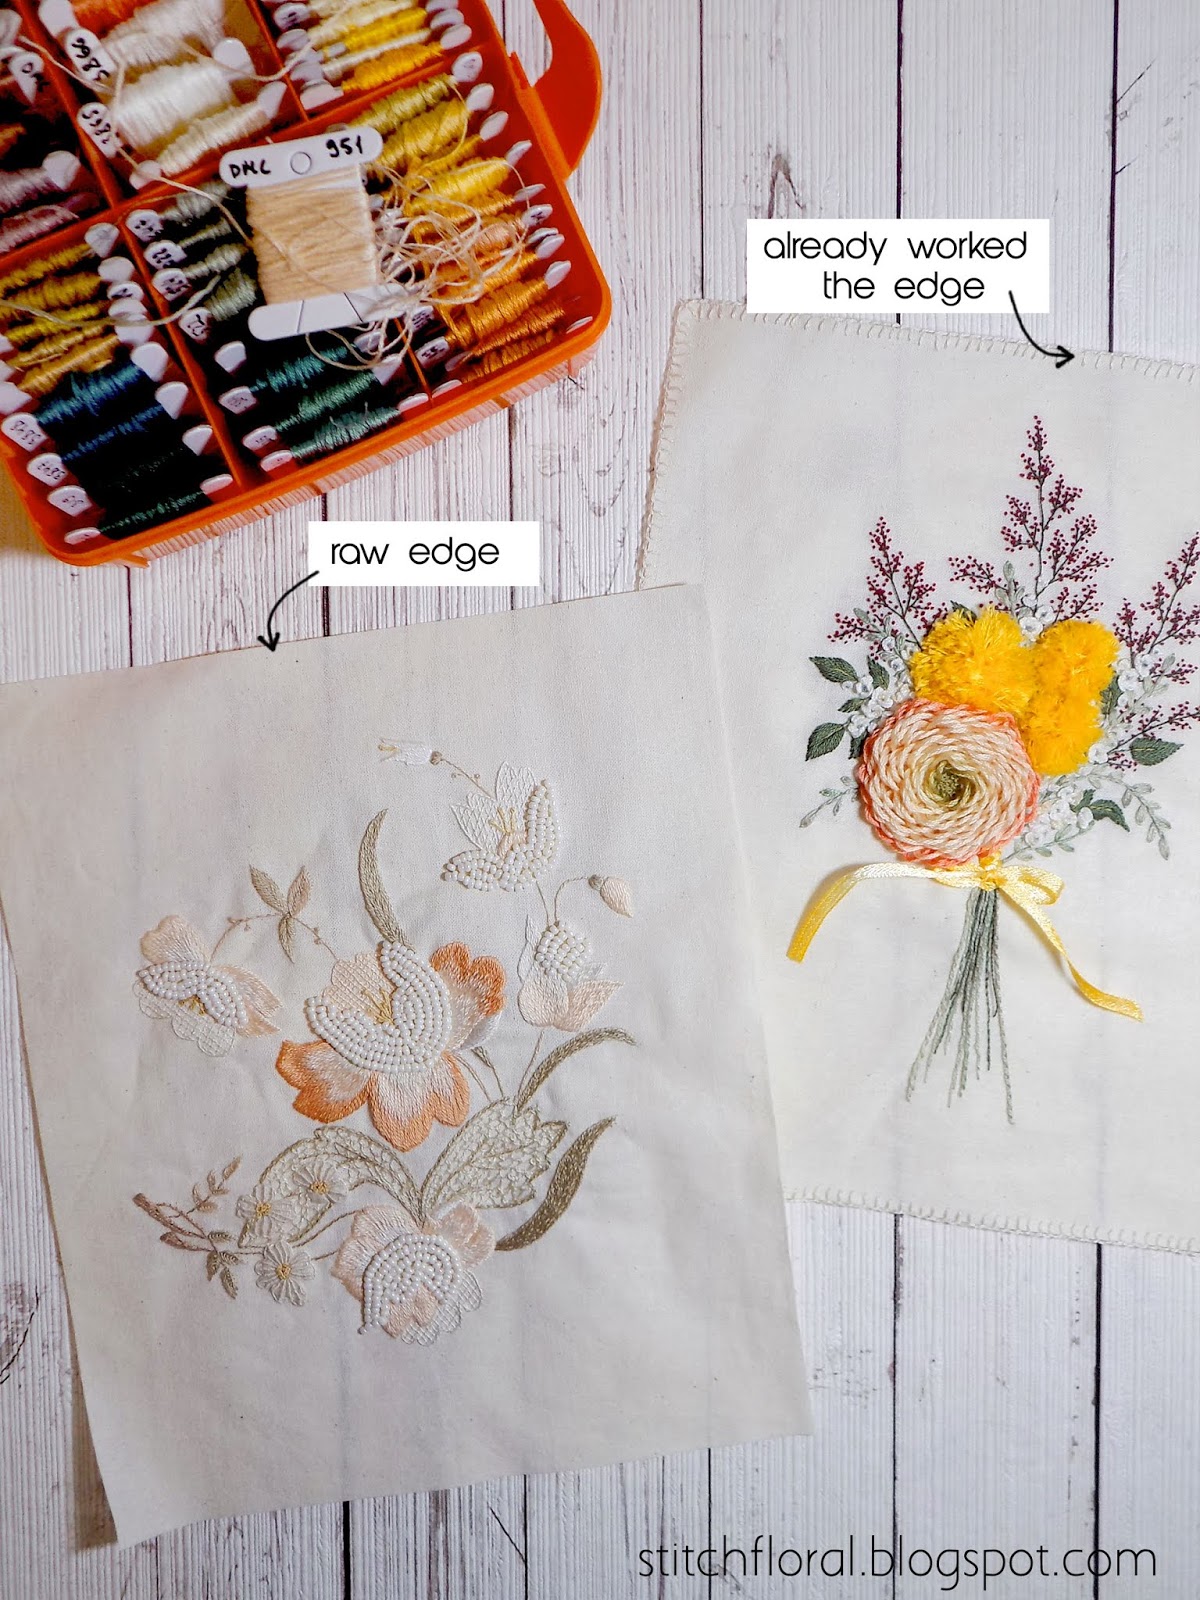 Hand stitching in art journaling with fabric and paper